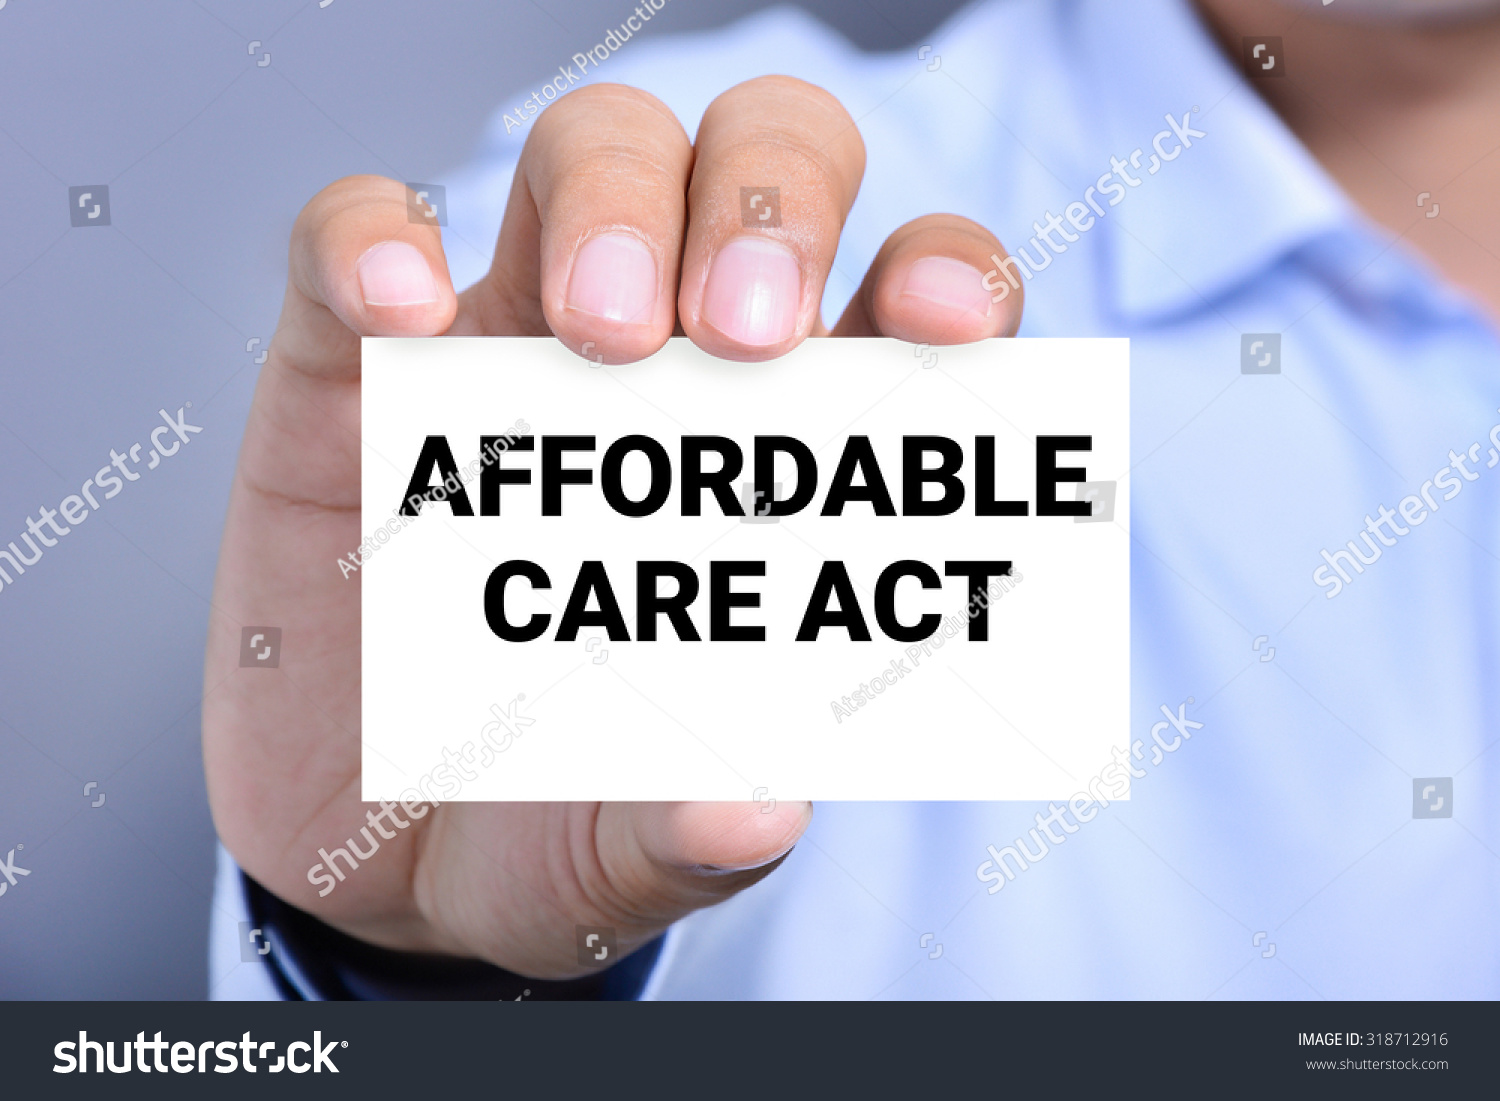 Affordable Care Act Or Aca Message Stock Photo 318712916 - Shutterstock1500 x 1101